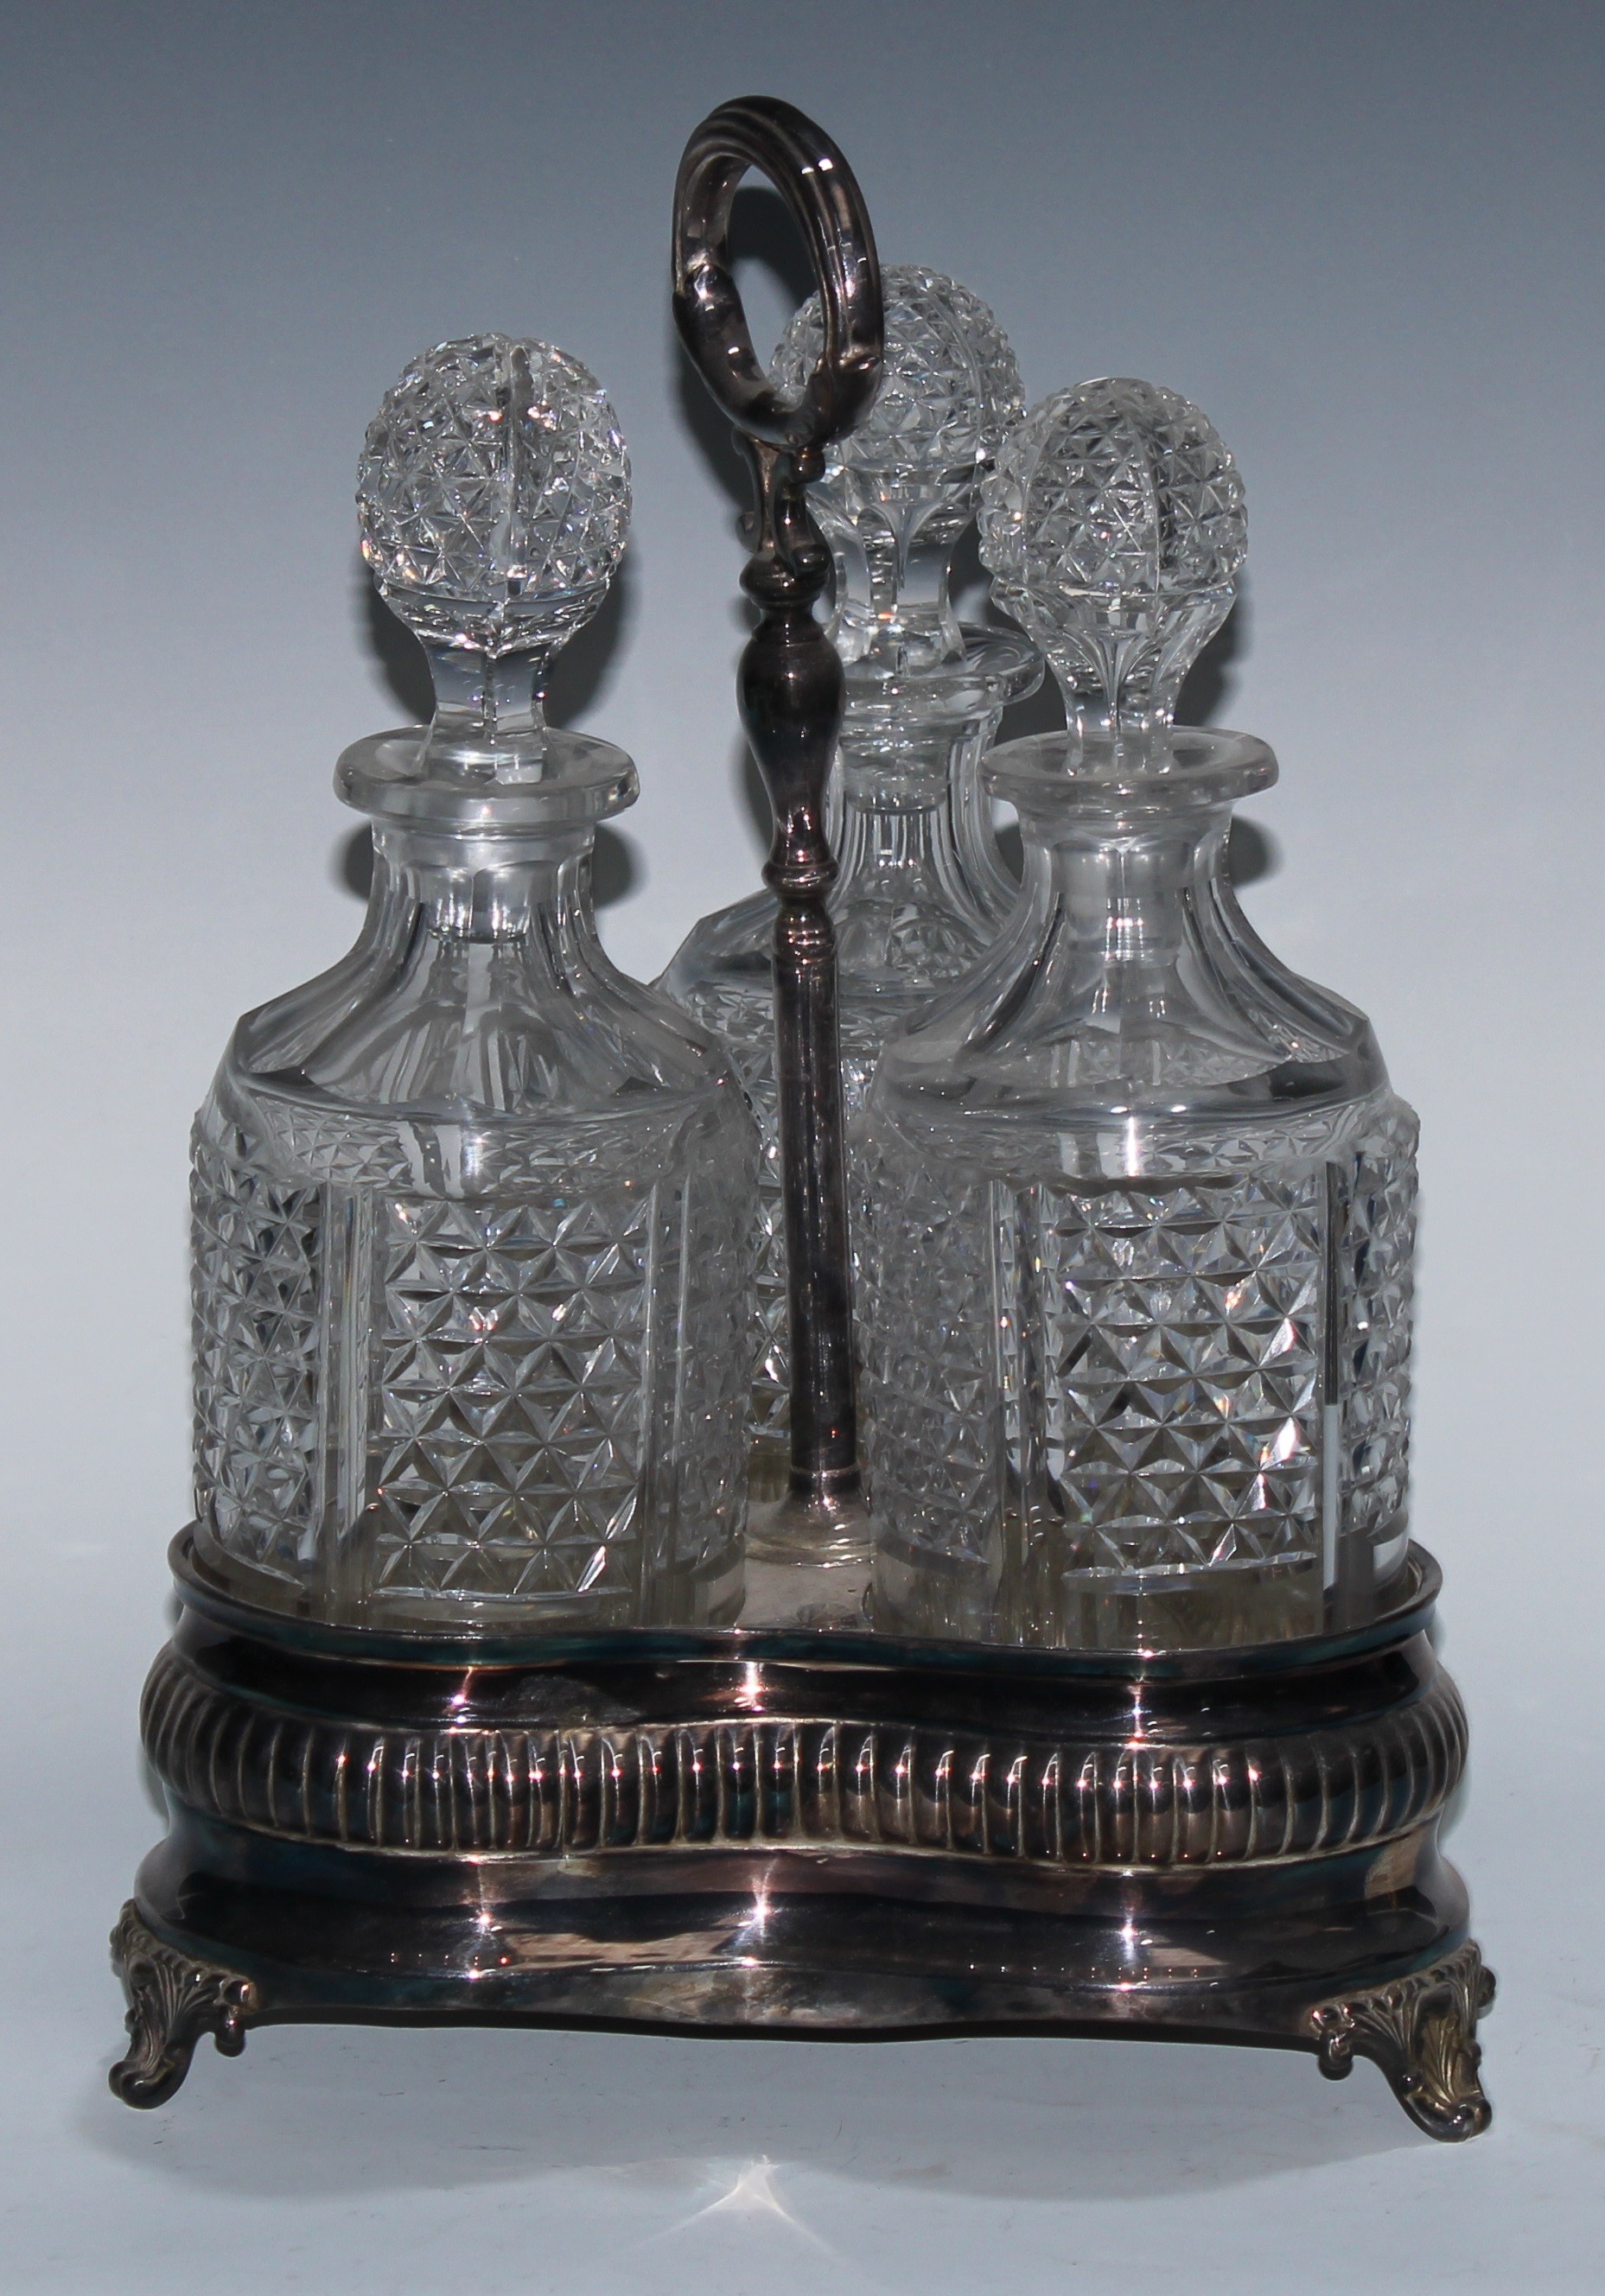 An Adam Revival EPNS and cut-glass three-bottle decanter stand, the trefoil-shaped base engraved